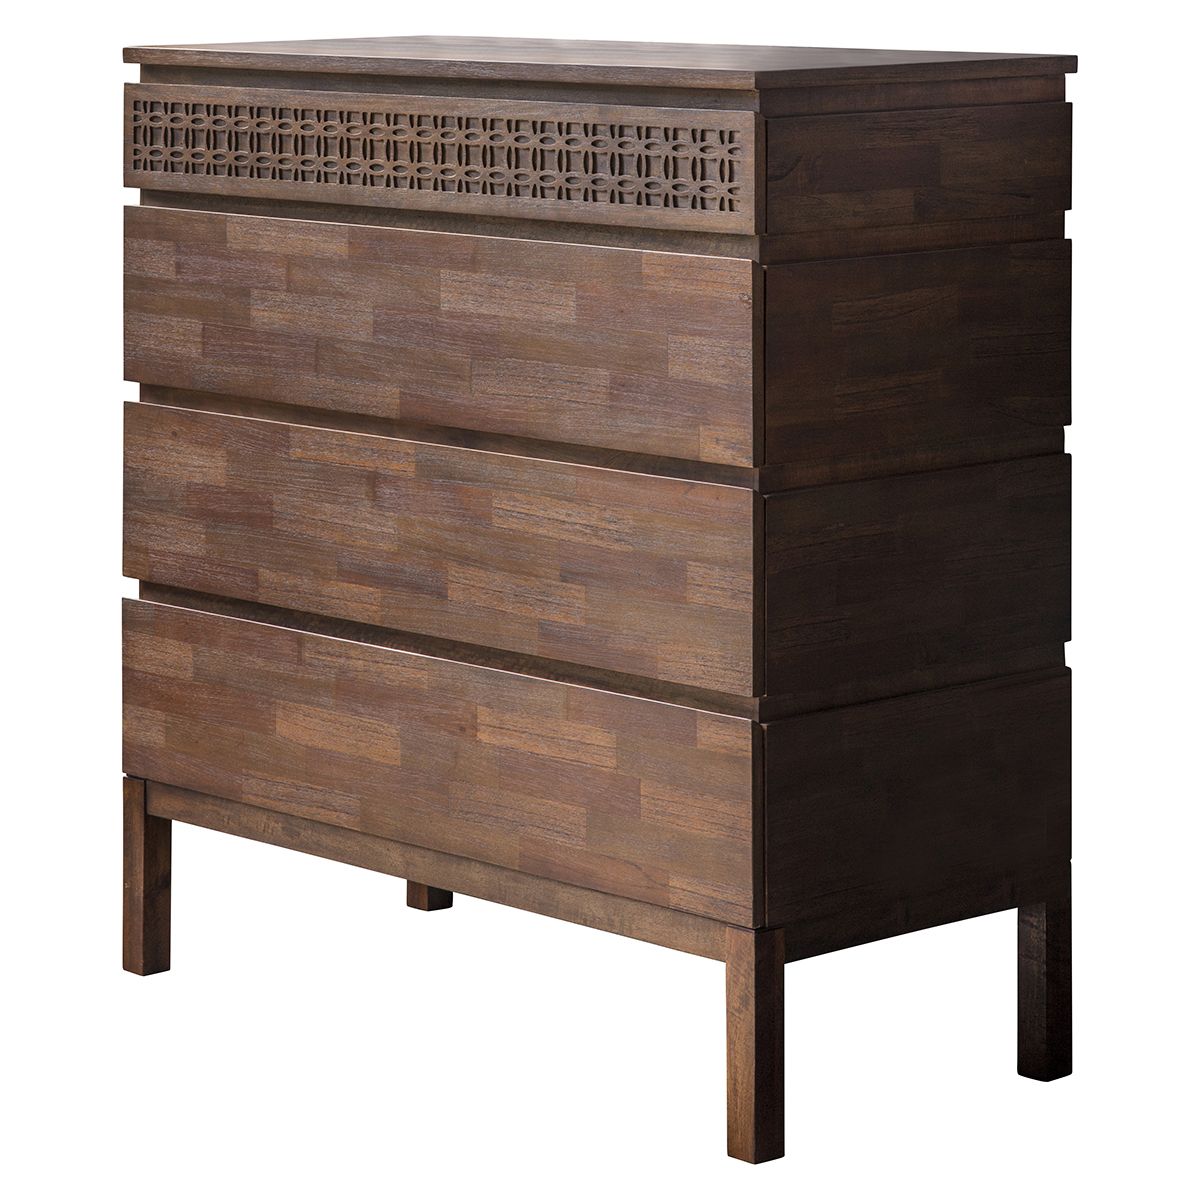 Sia 4 Drawer Bedroom Chest of Drawers - Brown